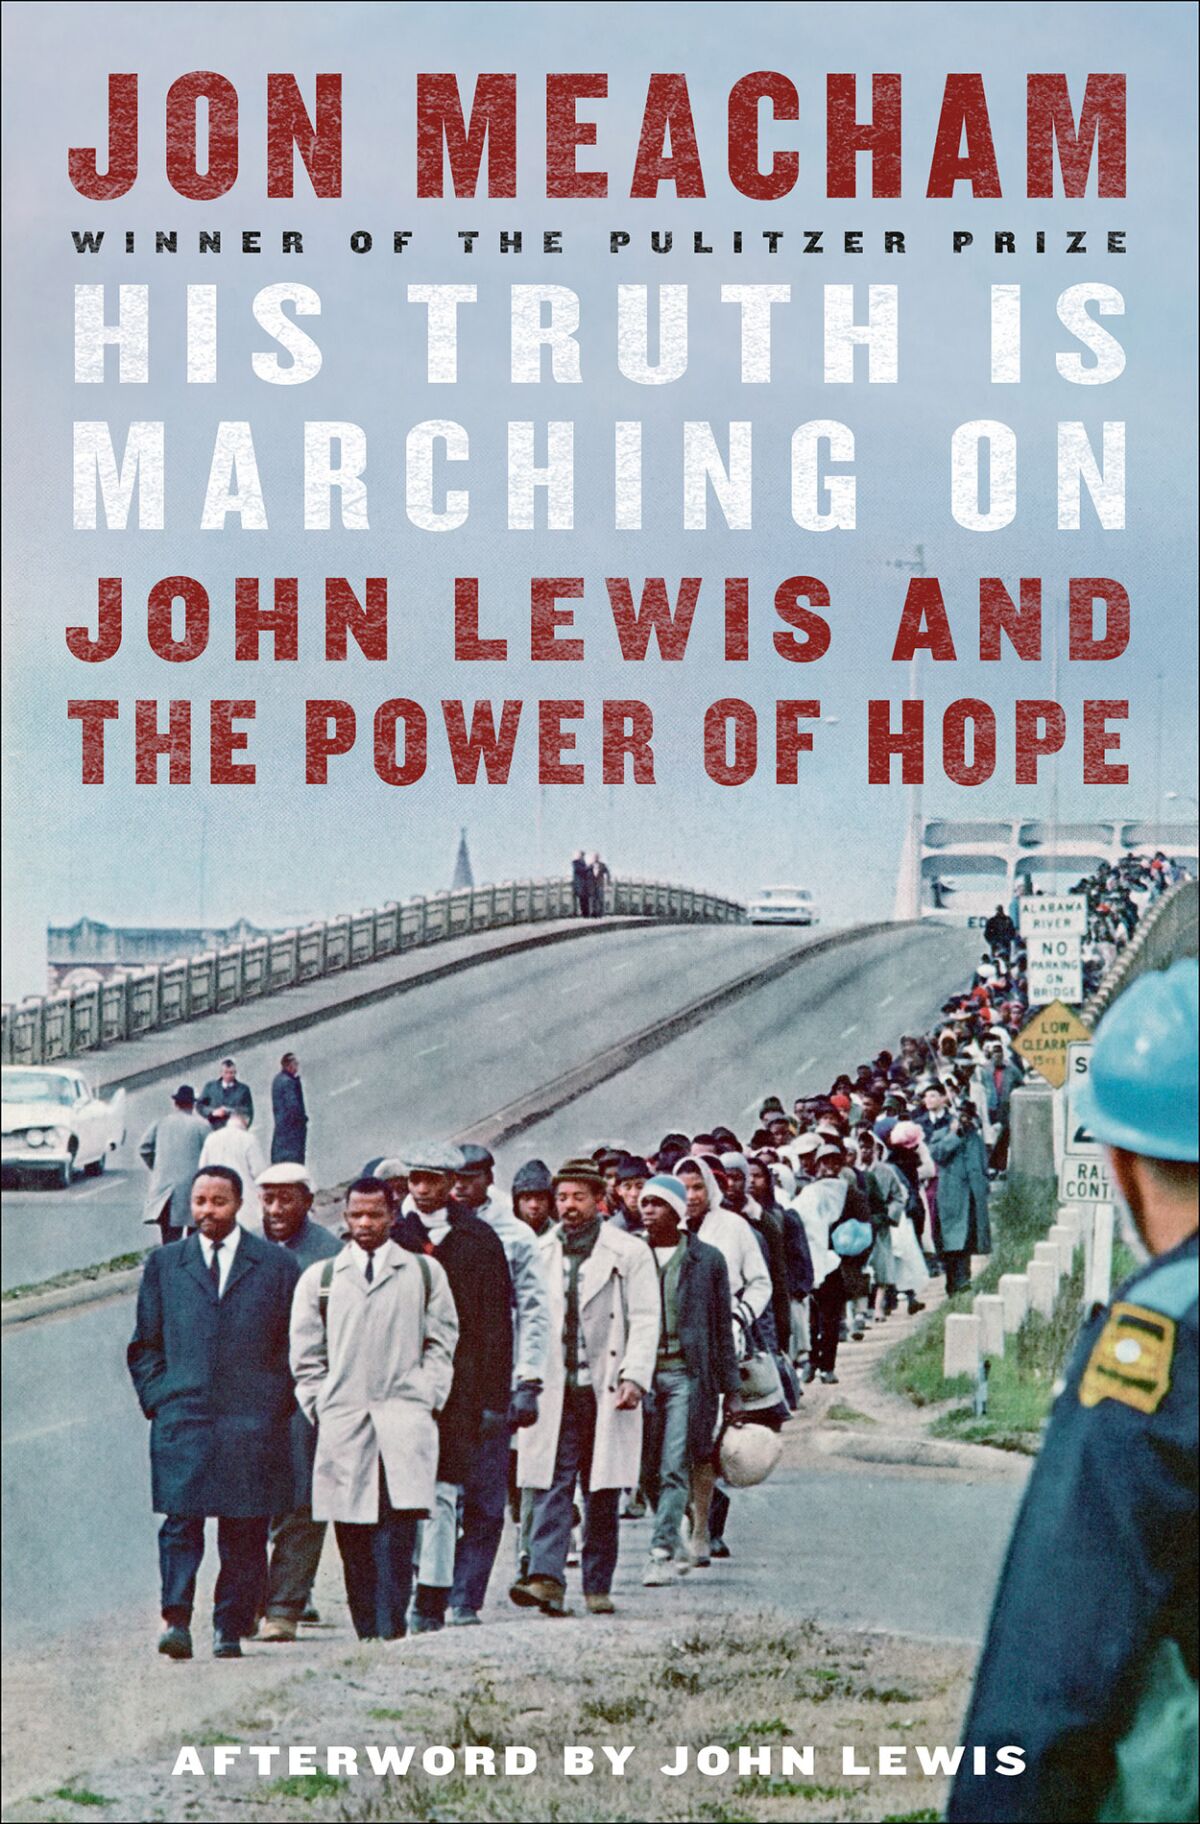 A book jacket for "His Truth Is Marching On: John Lewis and the Power of Hope" by Jon Meacham. 